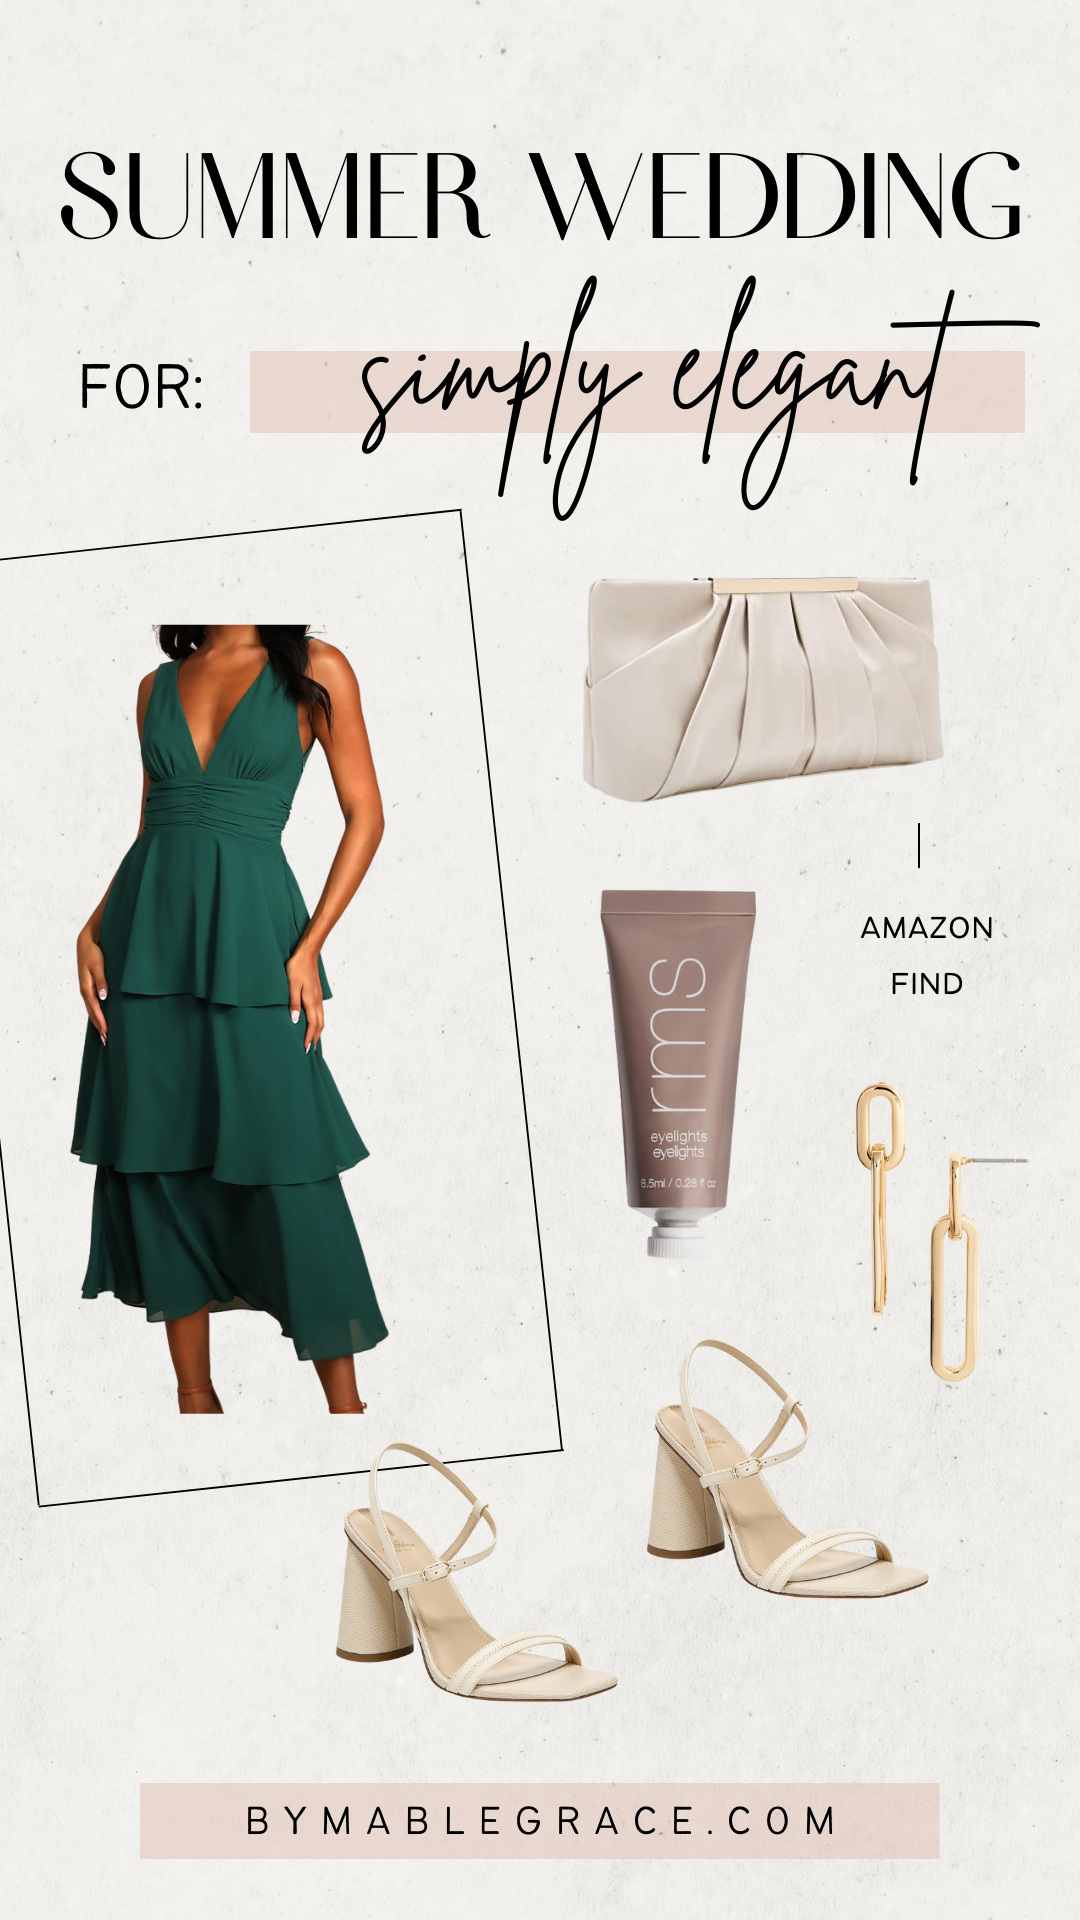 Spring Wedding Outfits for Every Occassion - by mable grace